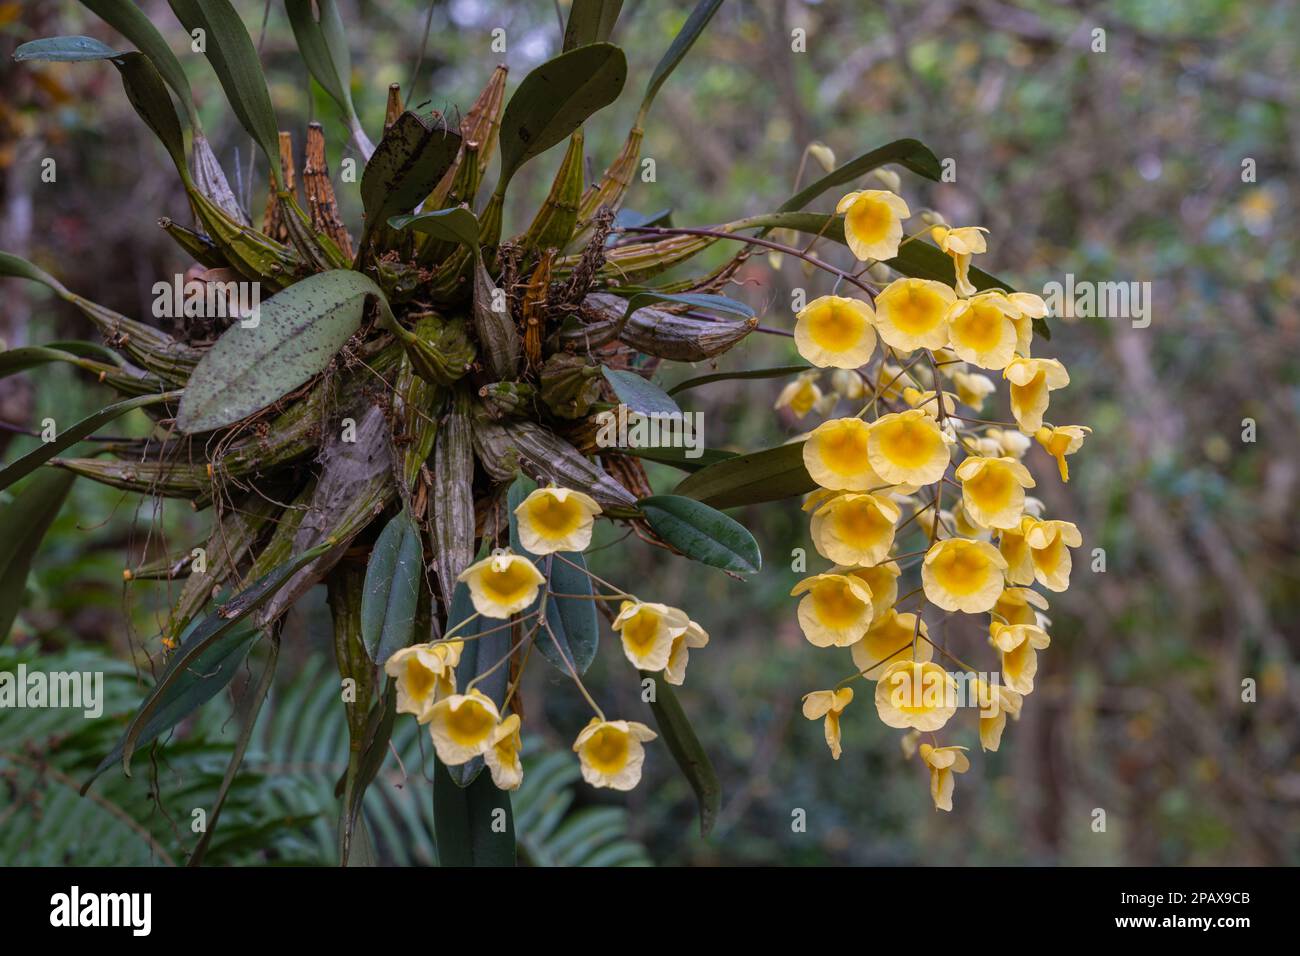 View of delicate yellow epiphytic orchid species dendrobium lindleyi or Lindley's dendrobium flowers blooming in spring on natural outdoor background Stock Photo